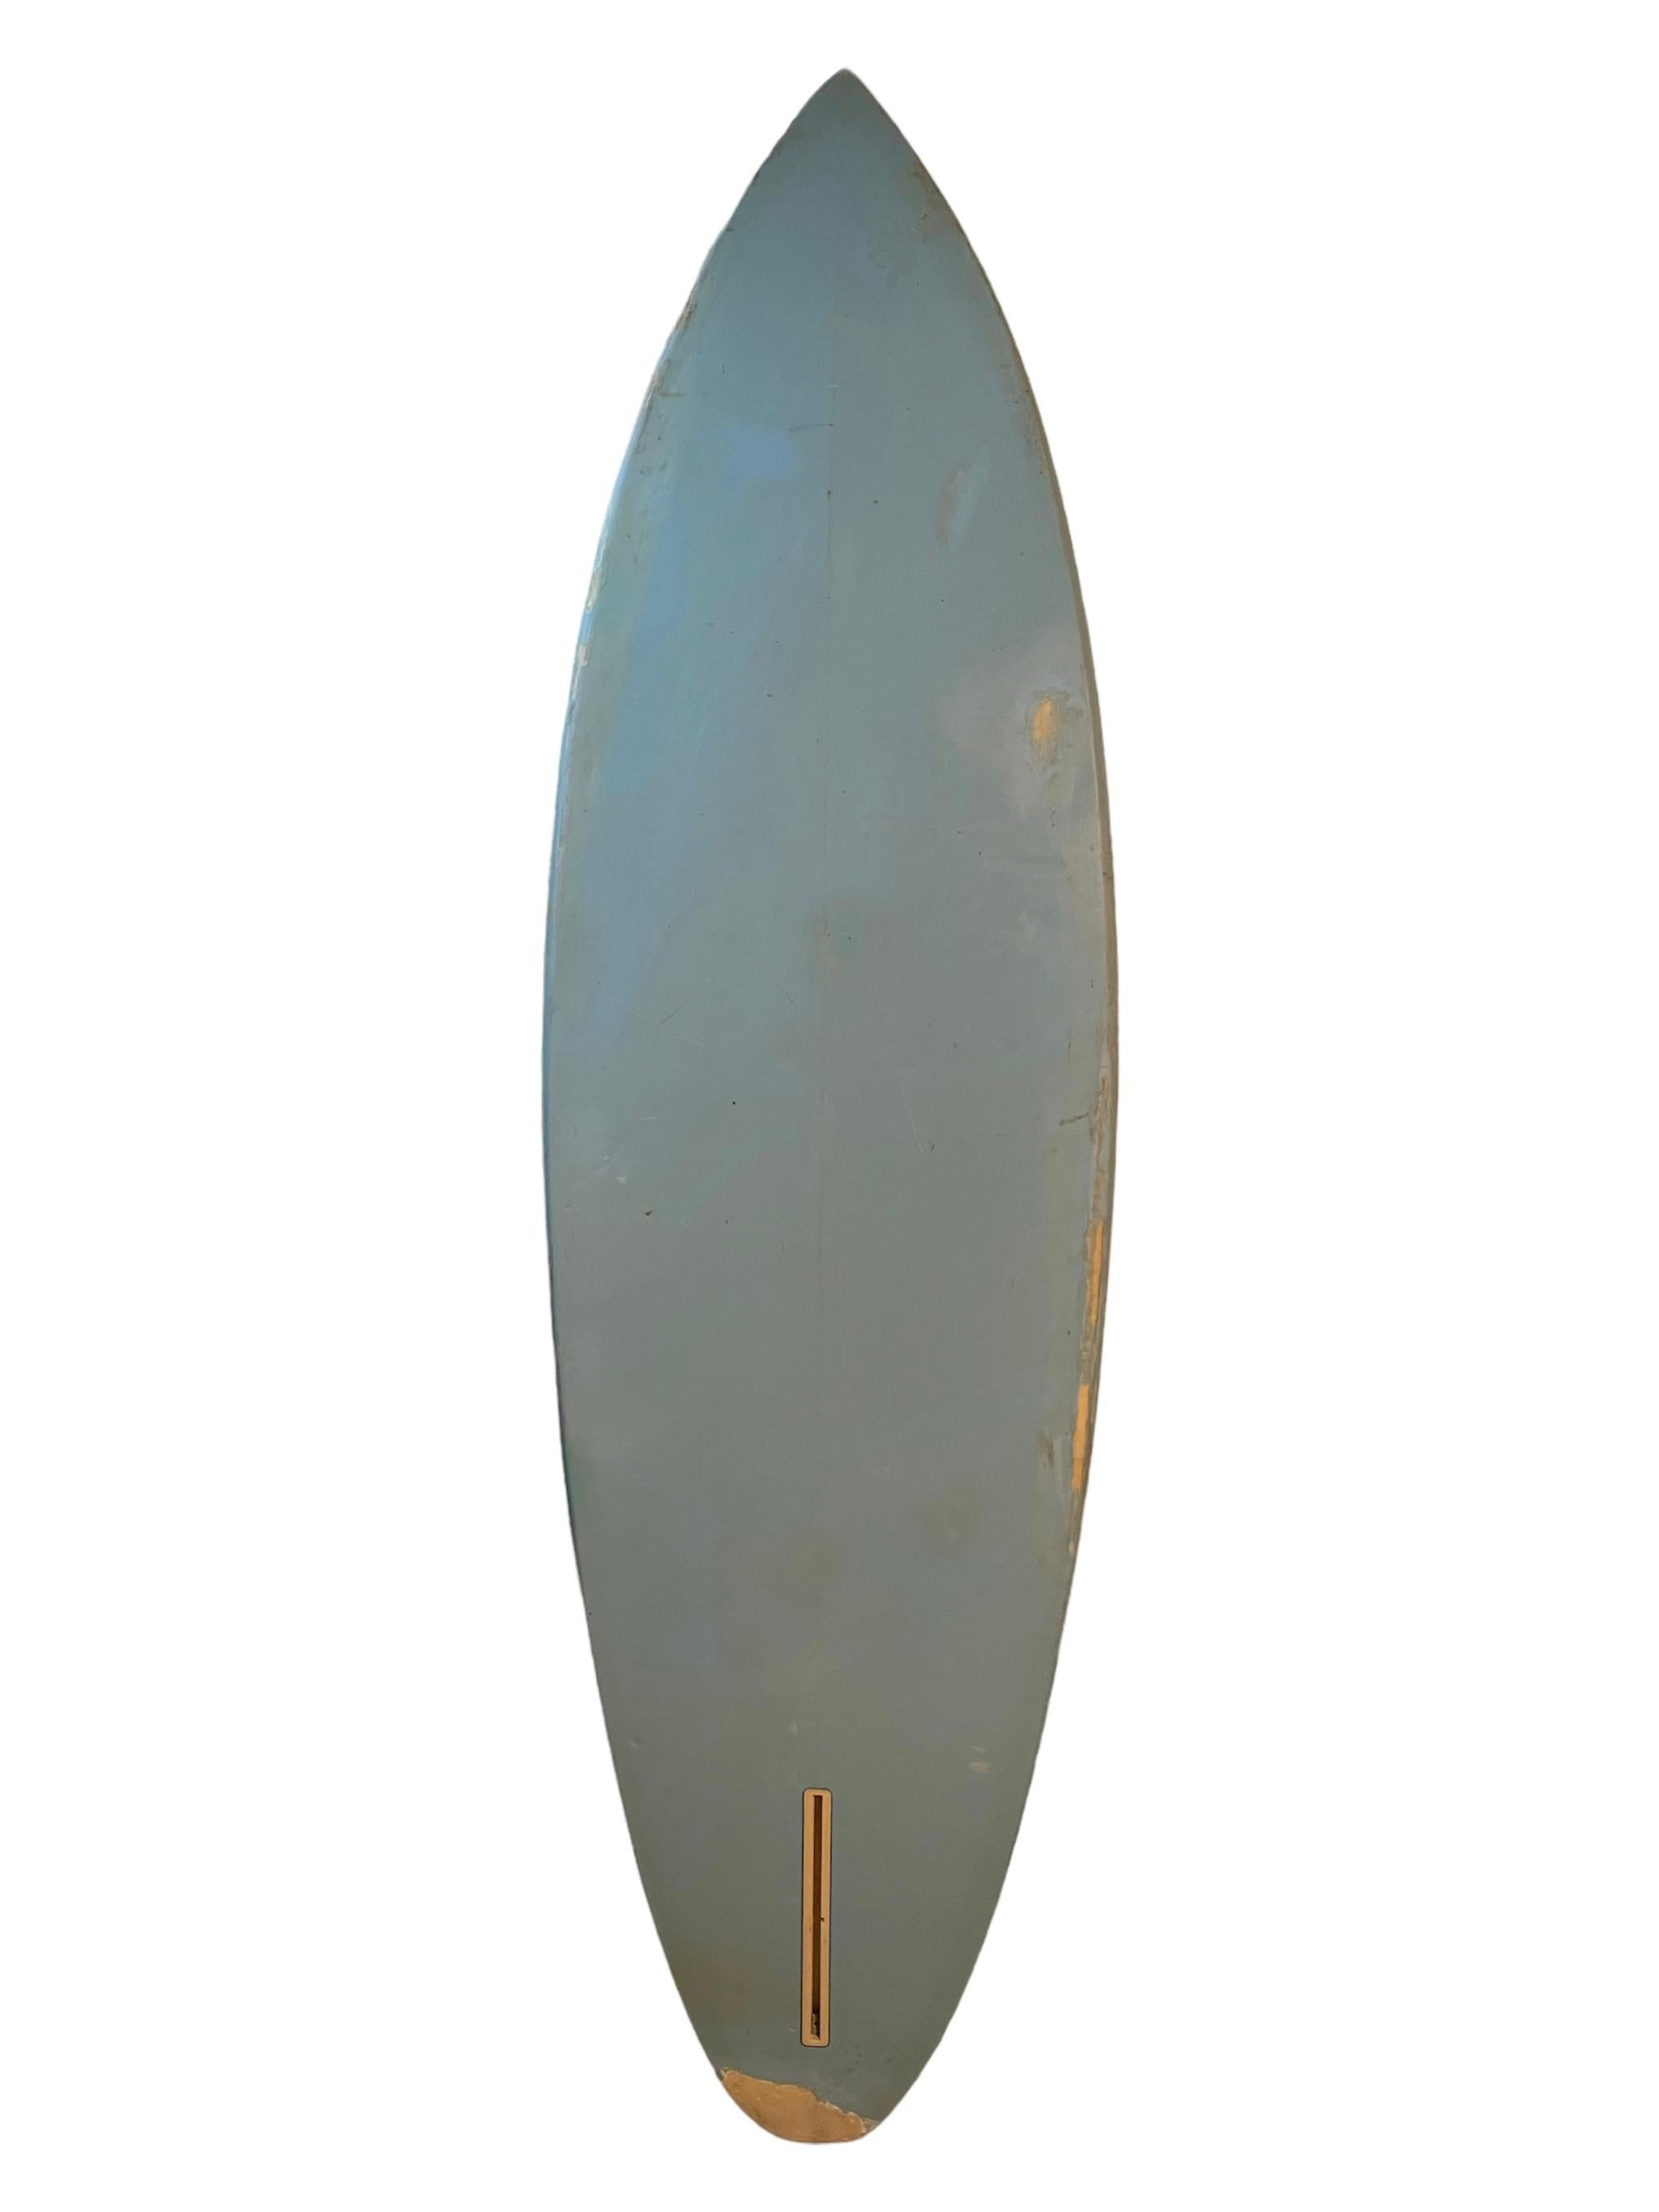 Vintage 1970s Ocean Pacific (Op) wave mural surfboard. Features stunning airbrushed work of art depicting a nocturnal wave mural. Rounded pintail shape design. A beautiful example of an original airbrushed 1970s vintage surfboard work of art.